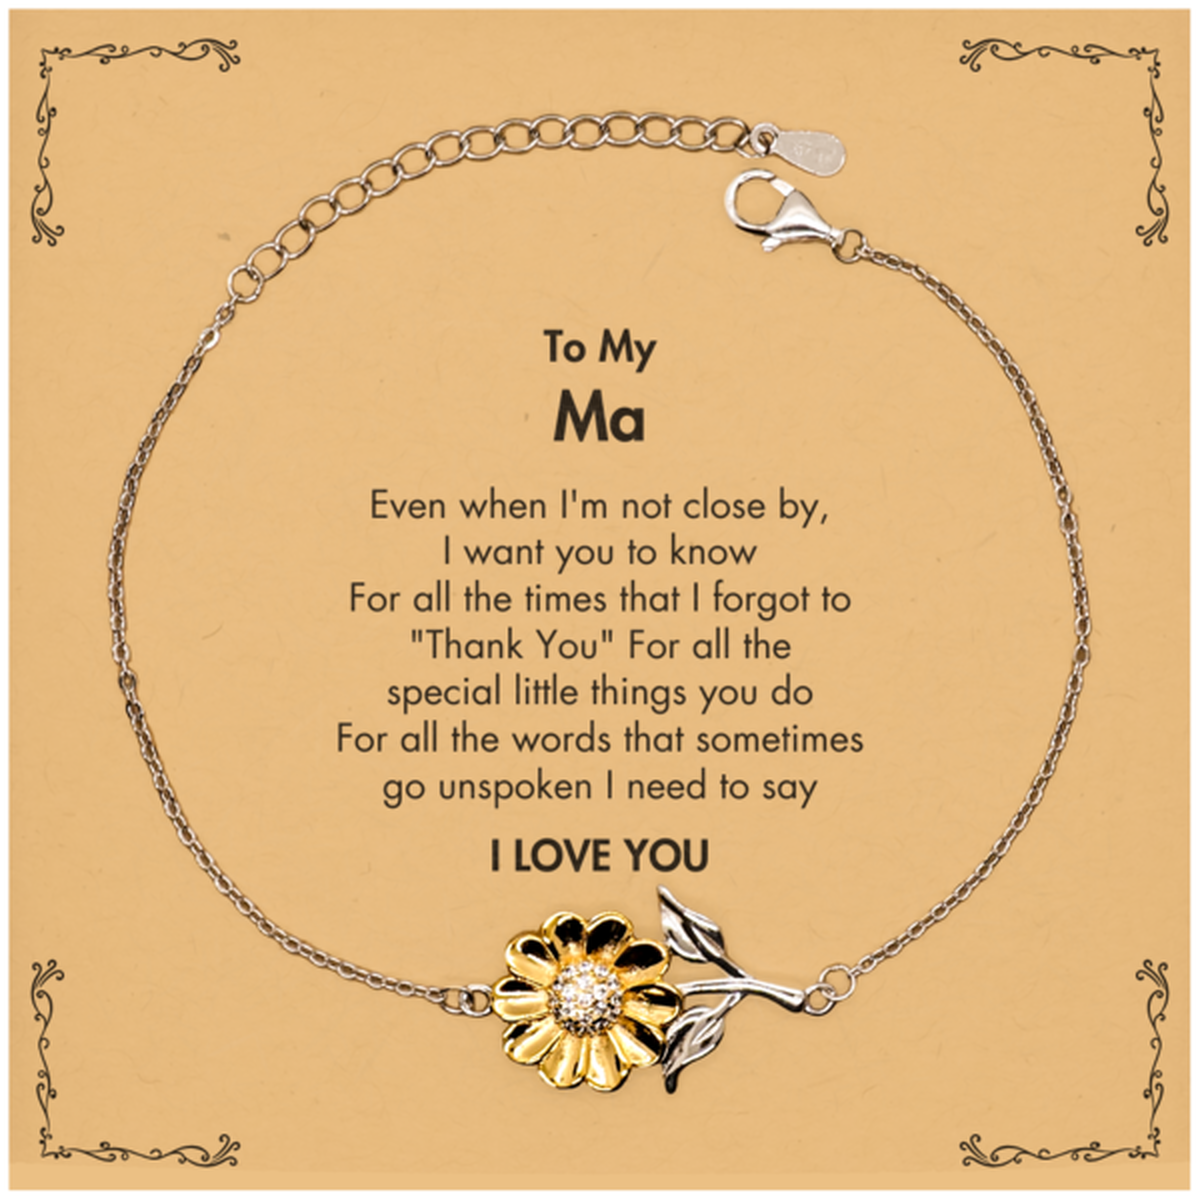 Thank You Gifts for Ma, Keepsake Sunflower Bracelet Gifts for Ma Birthday Mother's day Father's Day Ma For all the words That sometimes go unspoken I need to say I LOVE YOU